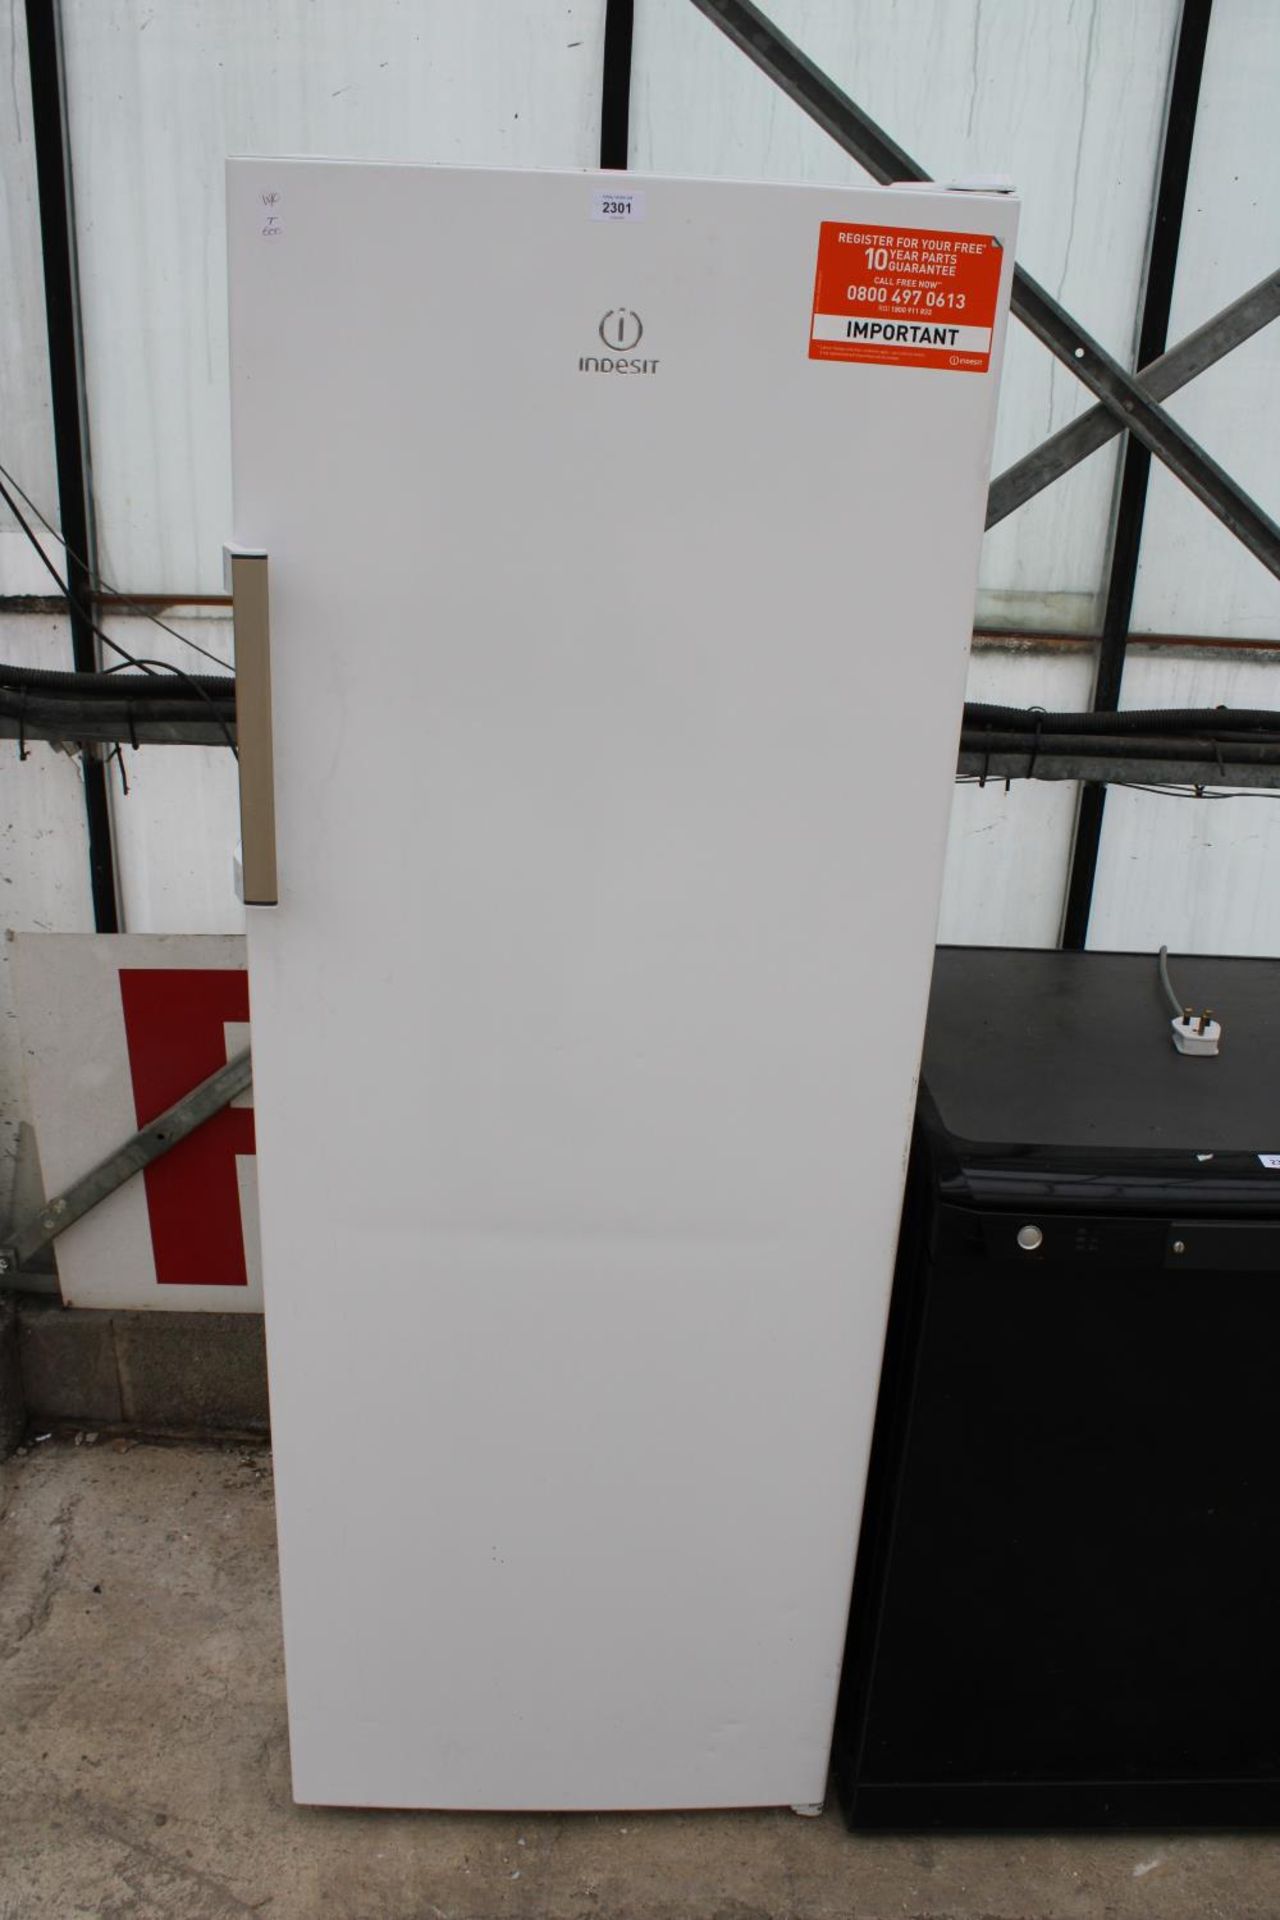 A WHITE INDESIT UPRIGHT FRIDGE BELIEVED IN WORKING ORDER BUT NO WARRANTY